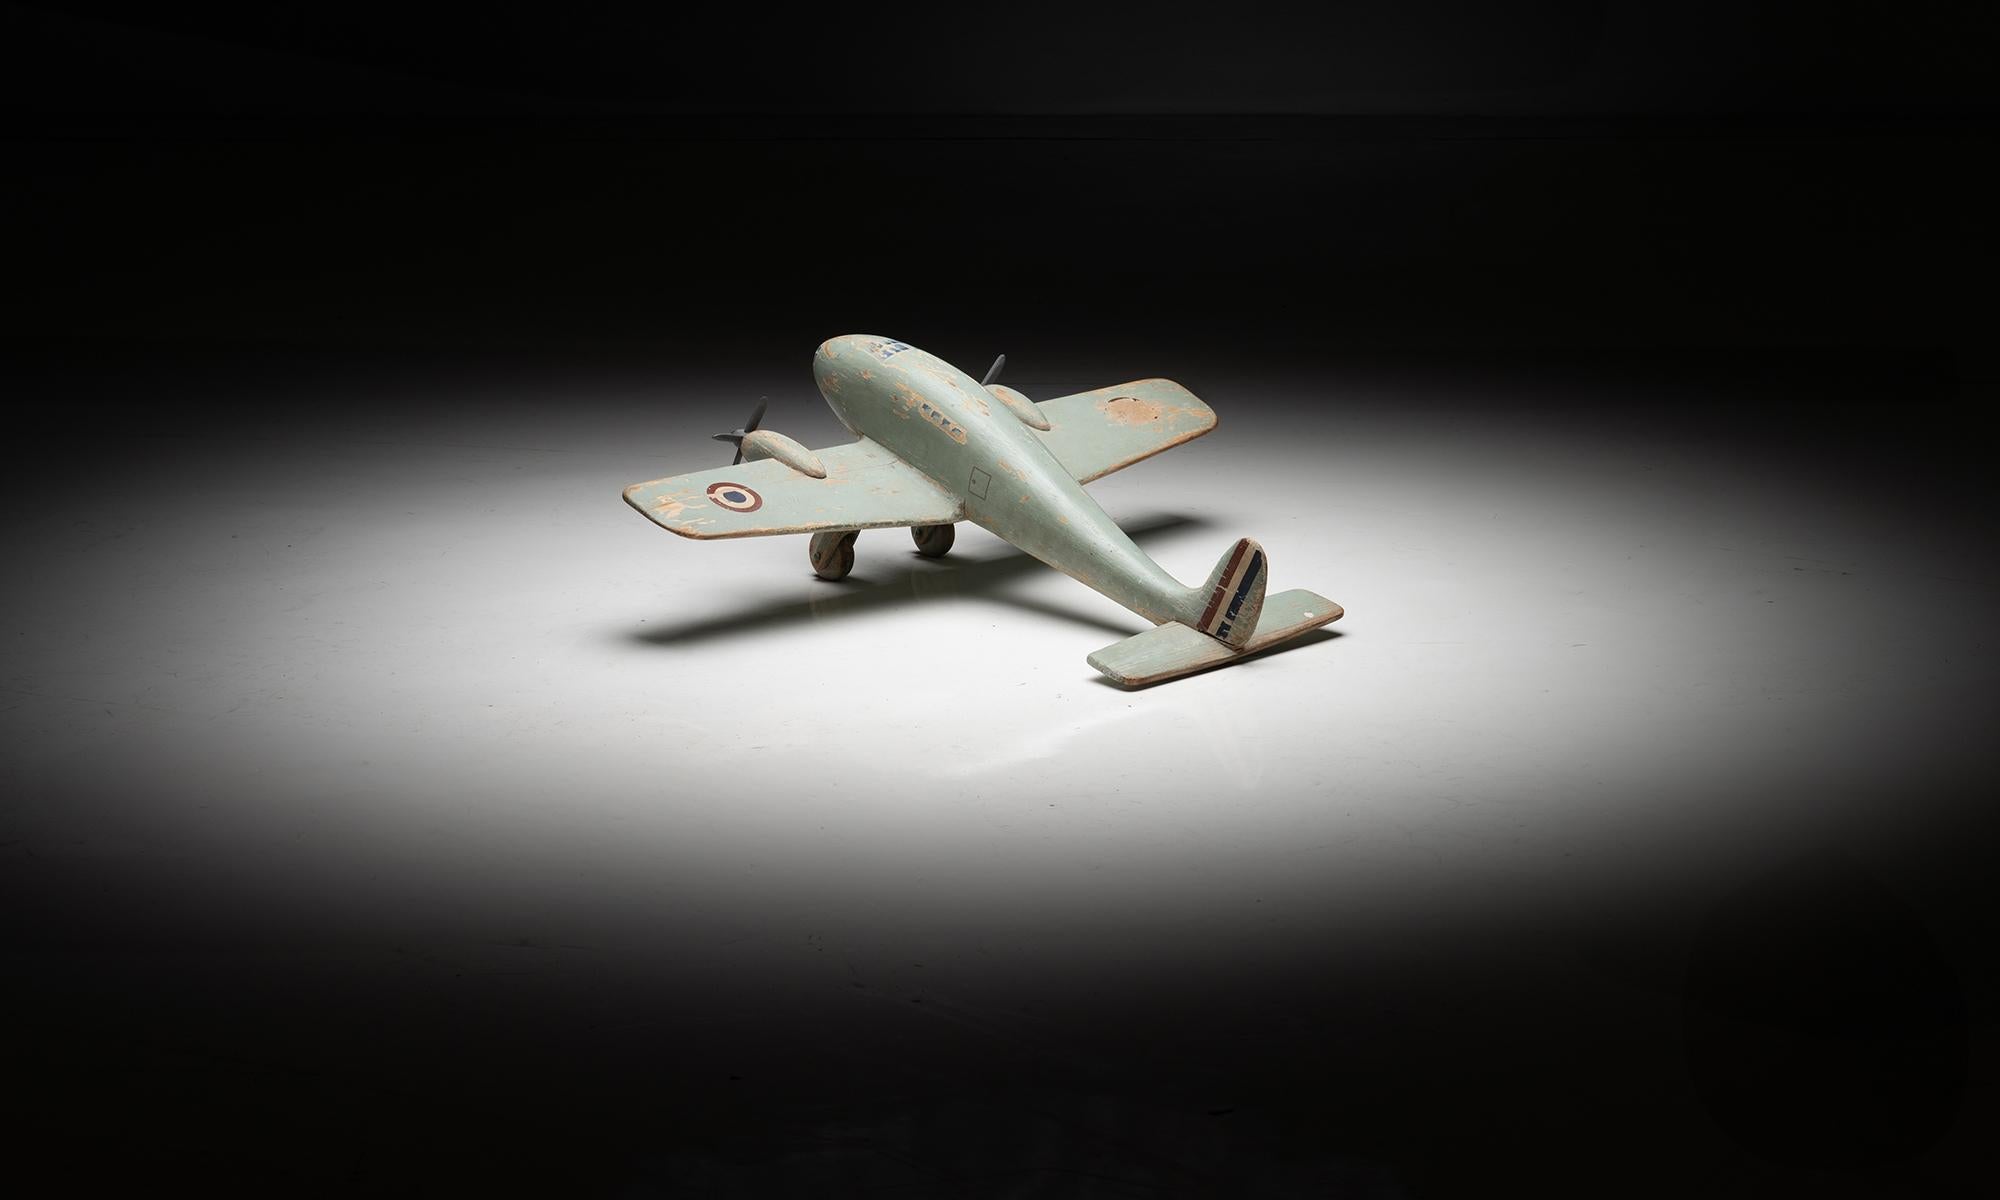 Hand Painted Toy Aeroplane
England circa 1900

Wooden Airplane with original paint remnants

27”w x 24”d x 9”h
Ref. O1988
